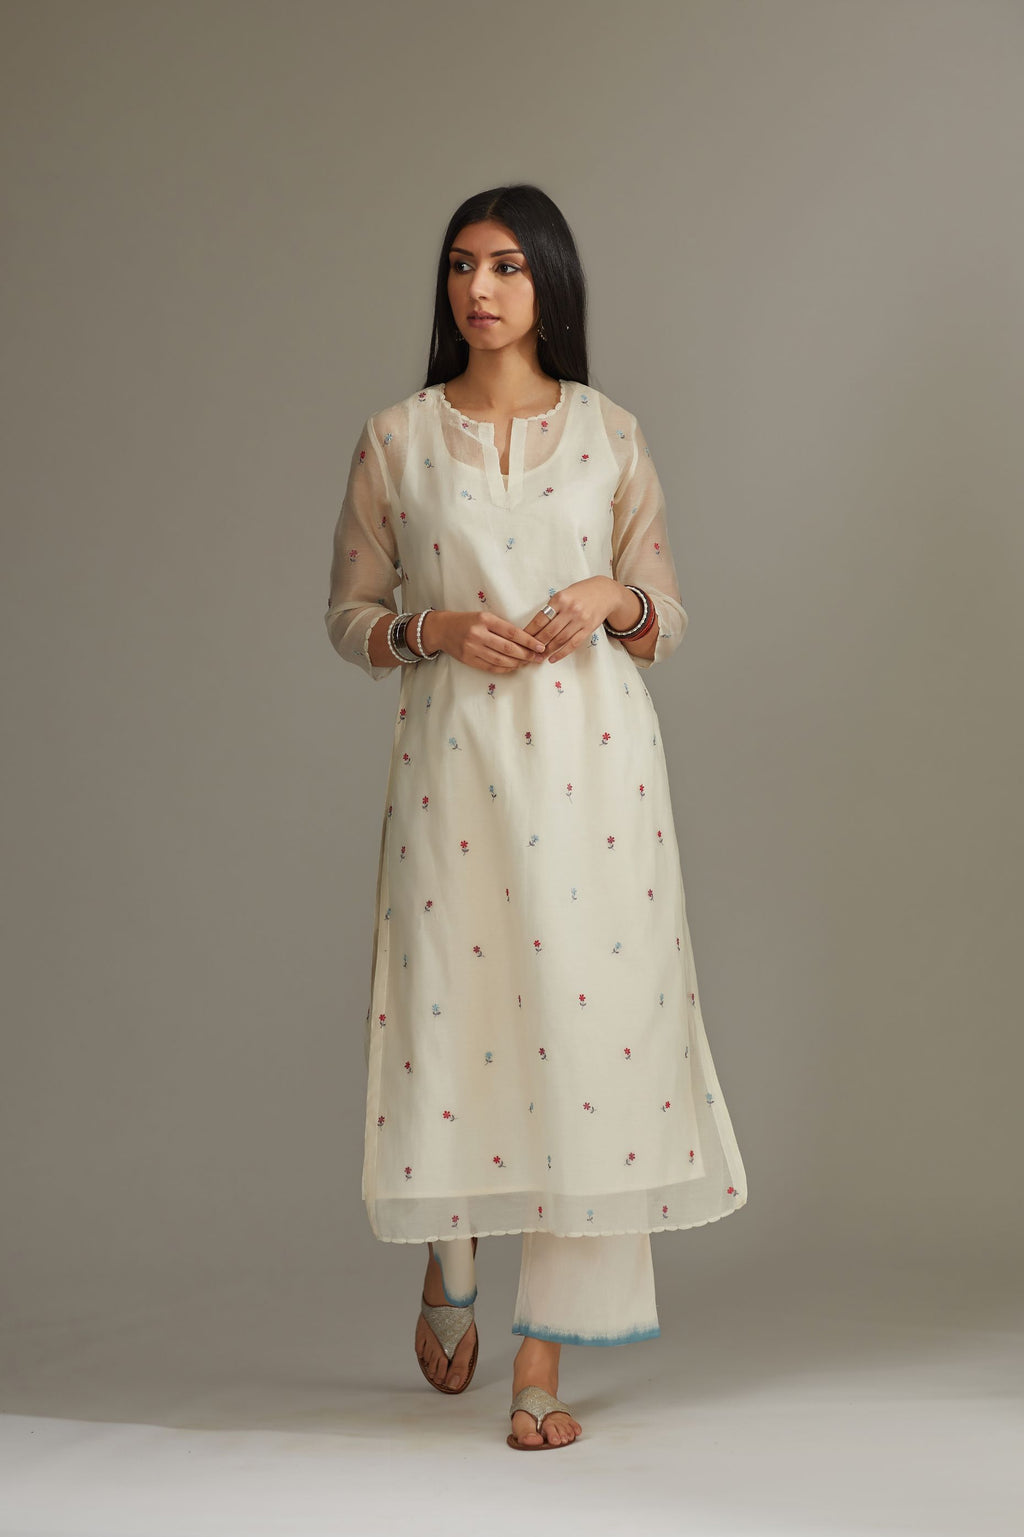 Straight Kurta set detailed with all-over multi colored small floral embroidery.